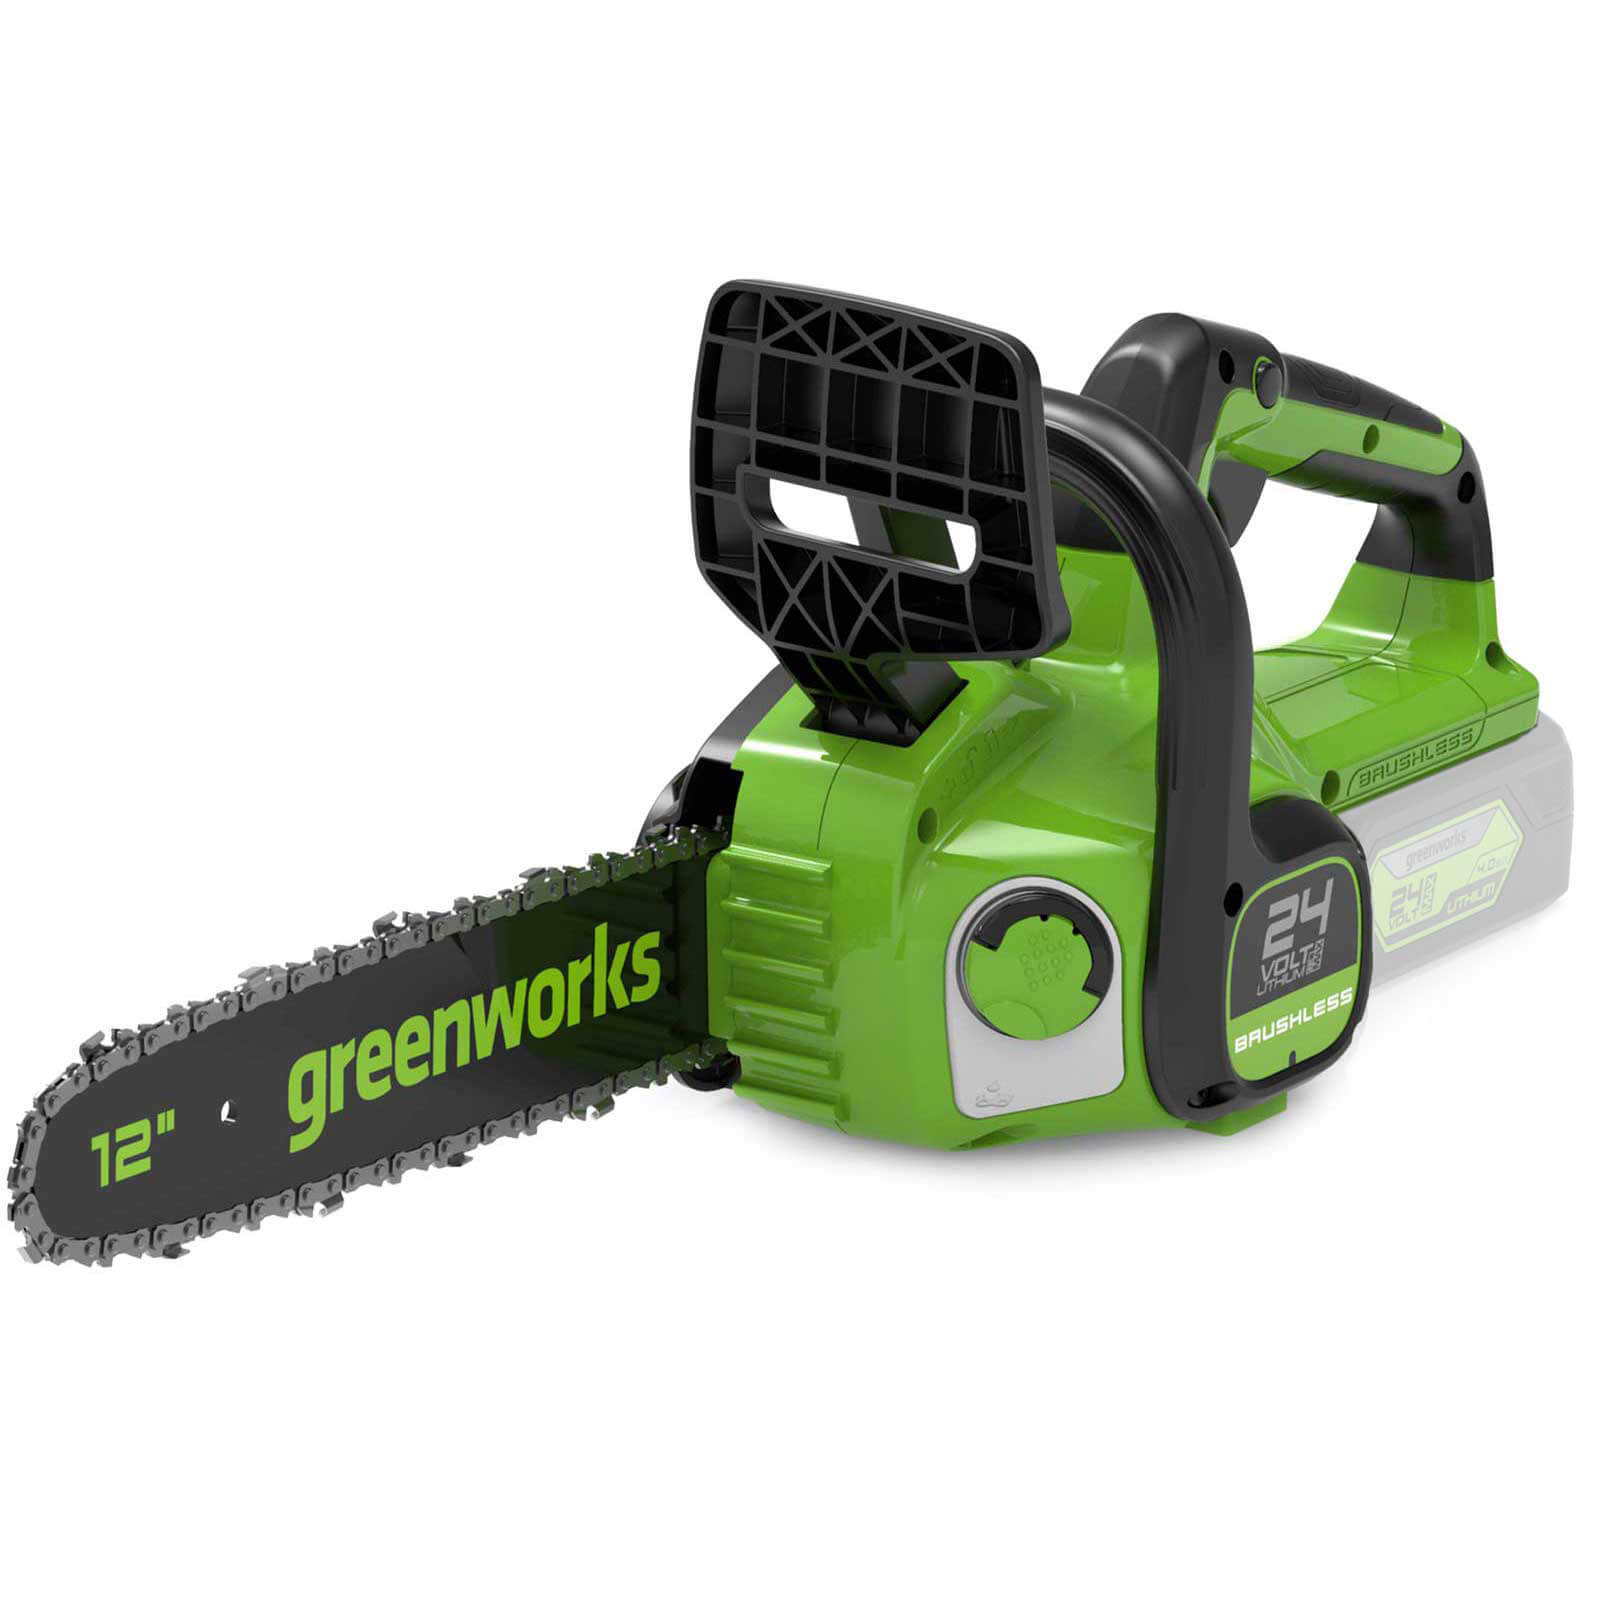 Greenworks GD24CS30 24v Cordless Brushless Chainsaw 300mm No Batteries No Charger